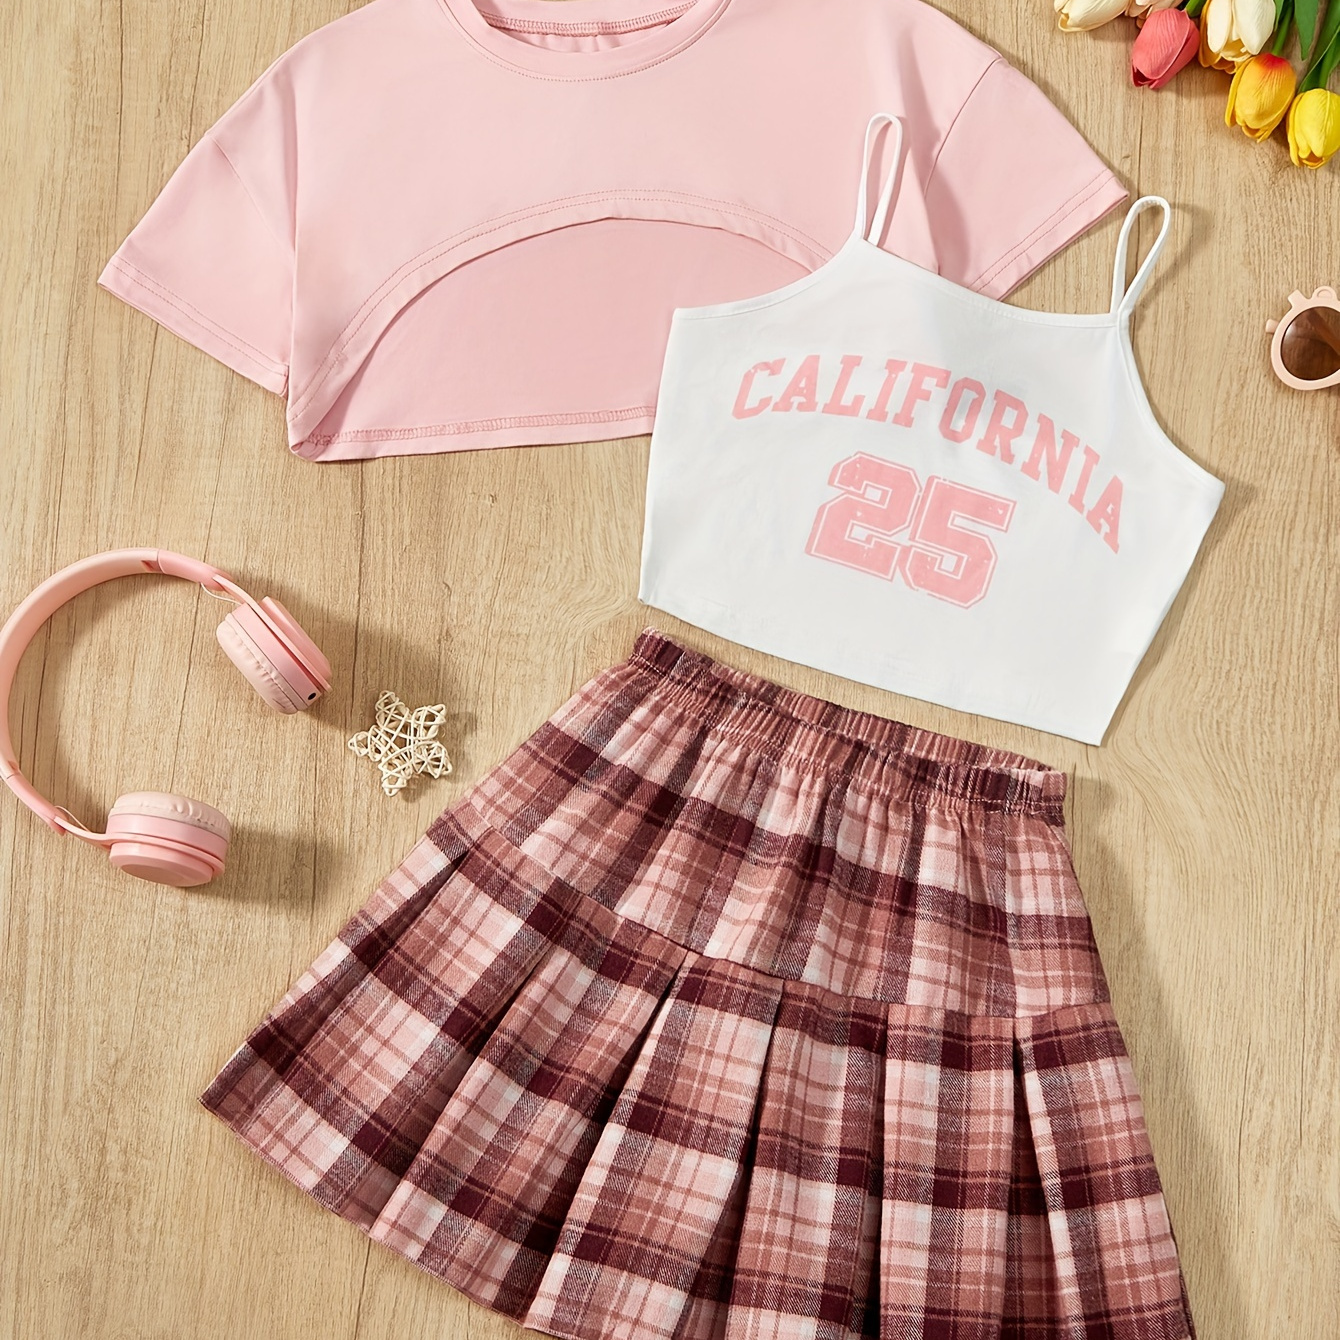 

5-14y Girls Athleisure Outfit Crop Tee + Camisole + Plaid Pleated Skirt Set Preppy Style